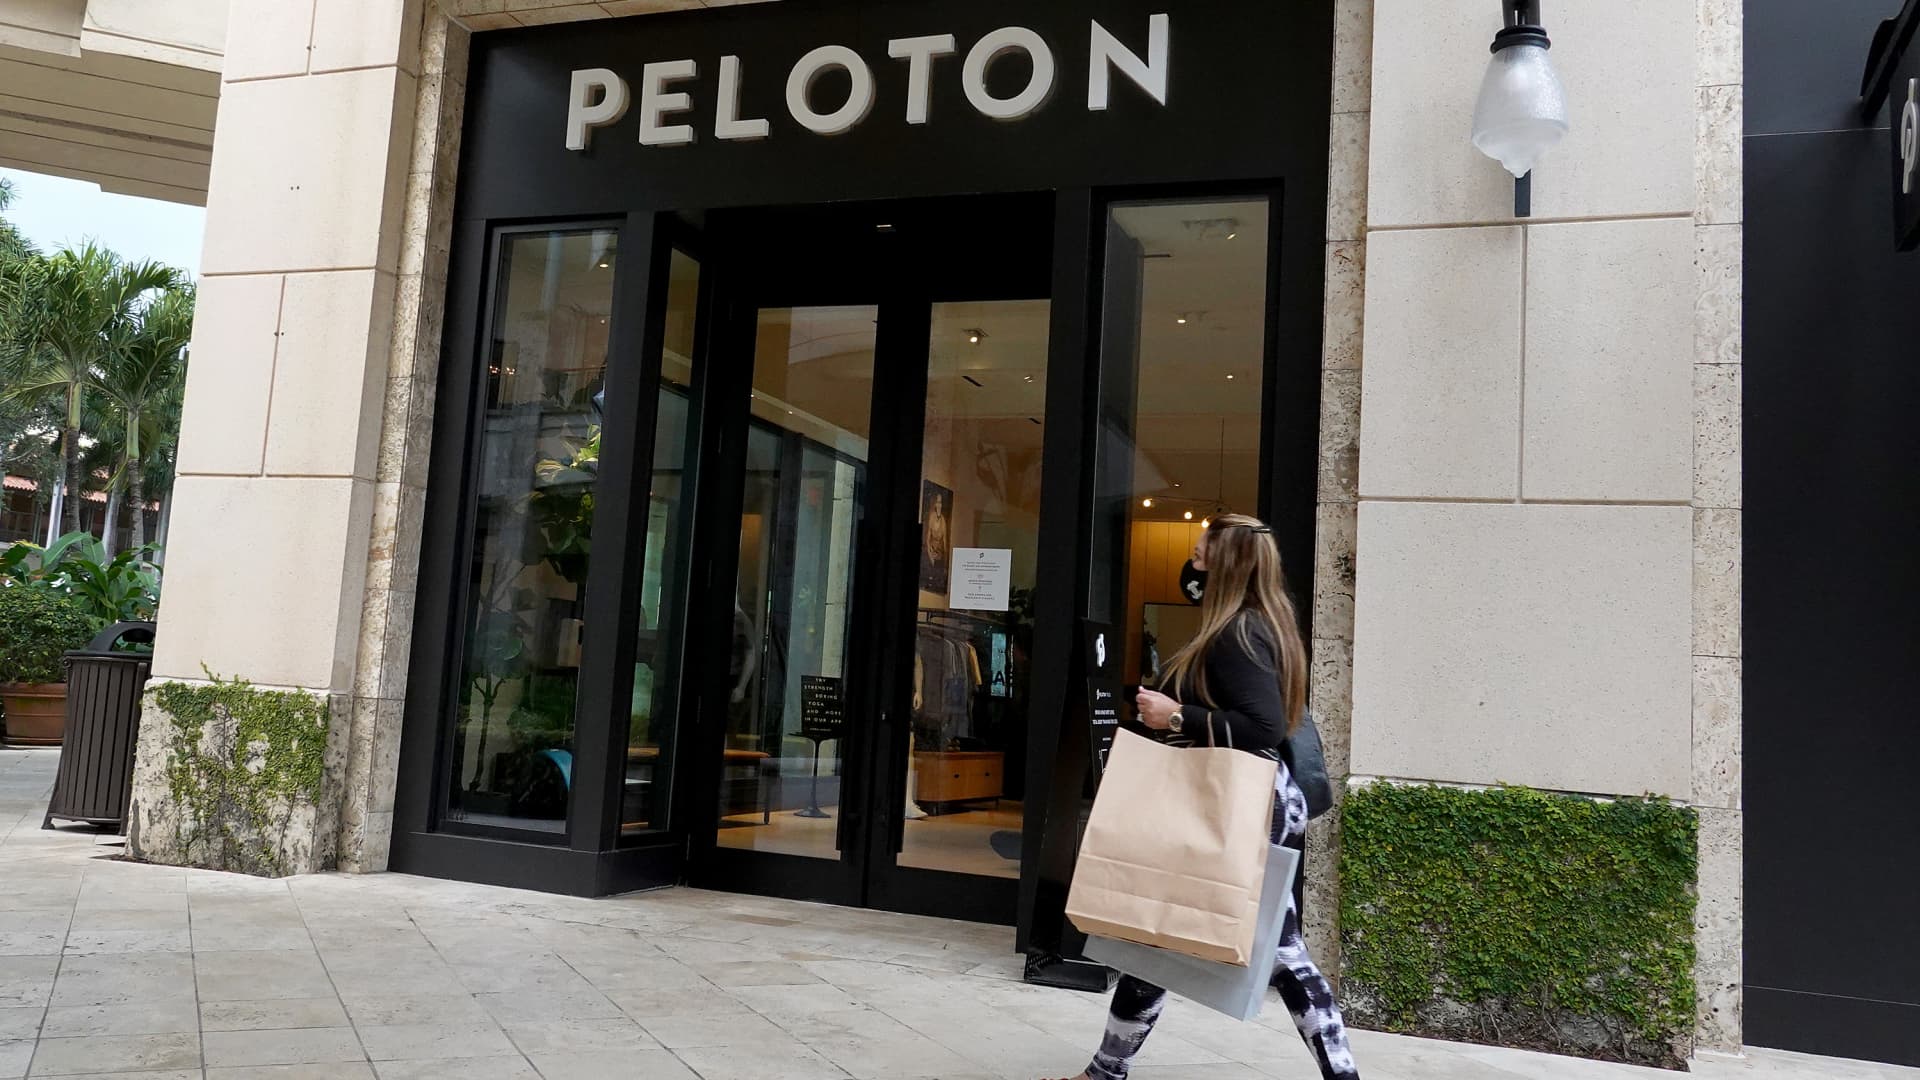 A person walks past a Peloton store on January 20, 2022 in Coral Gables, Florida.